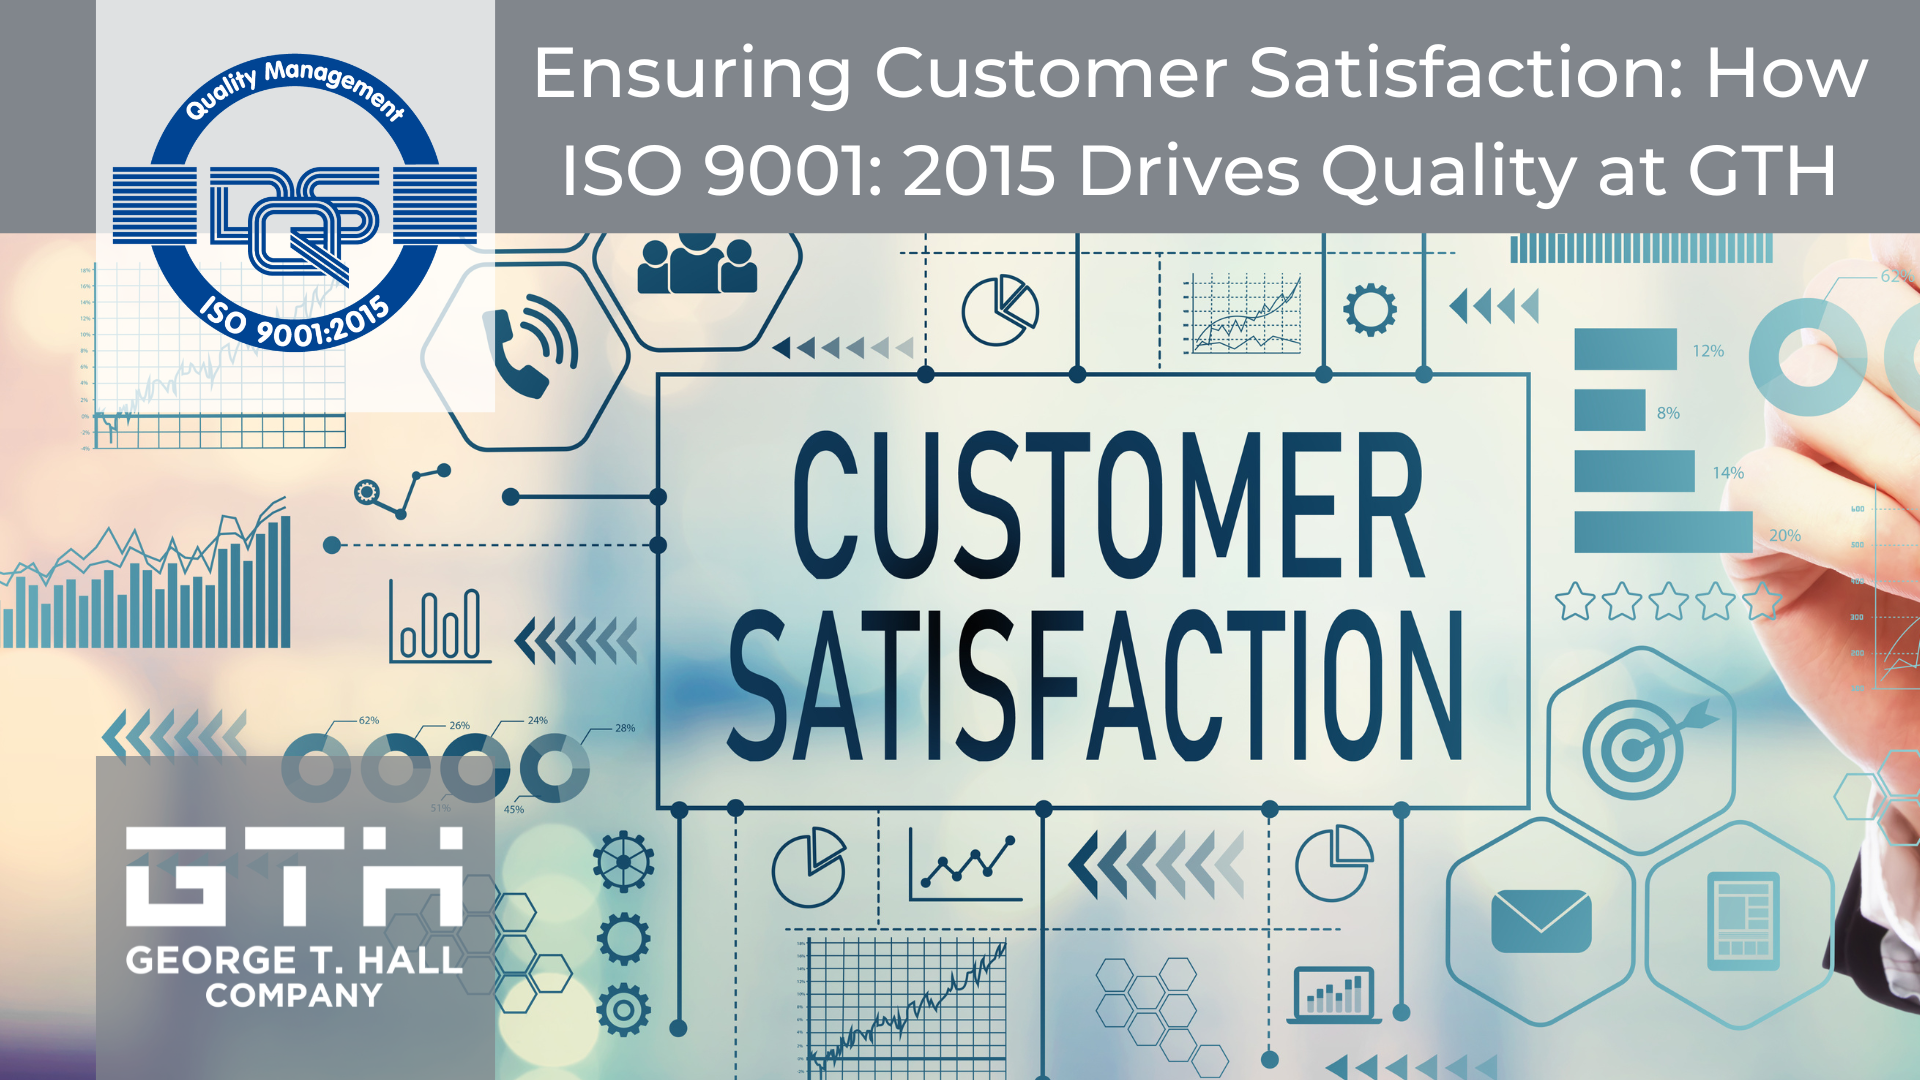 Ensuring Customer Satisfaction: How ISO 9001:2015 Drives Quality at GTH